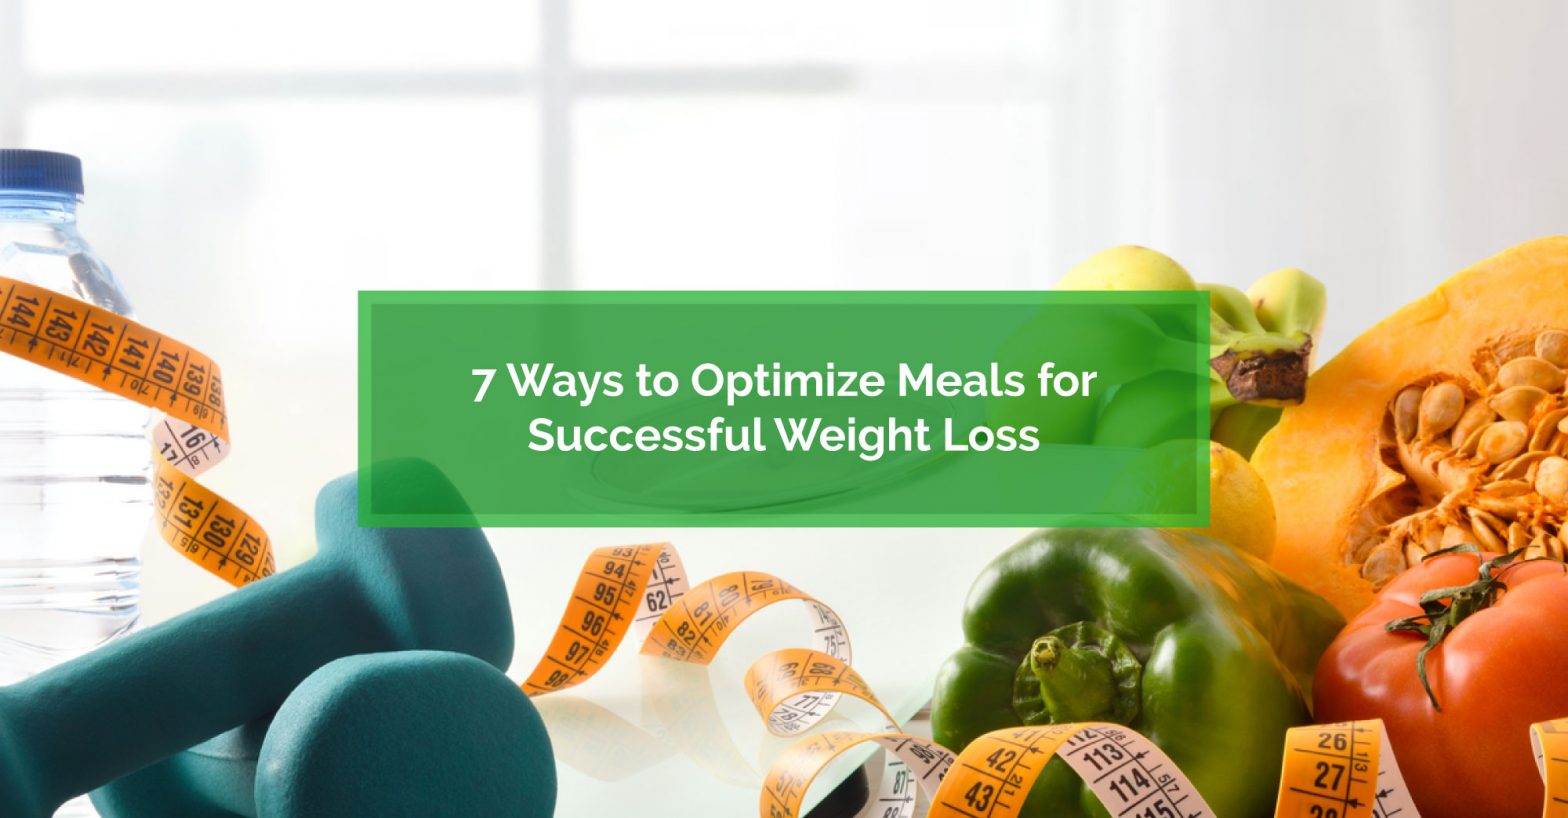 Tips to Optimize Meals for Successful Weight Loss